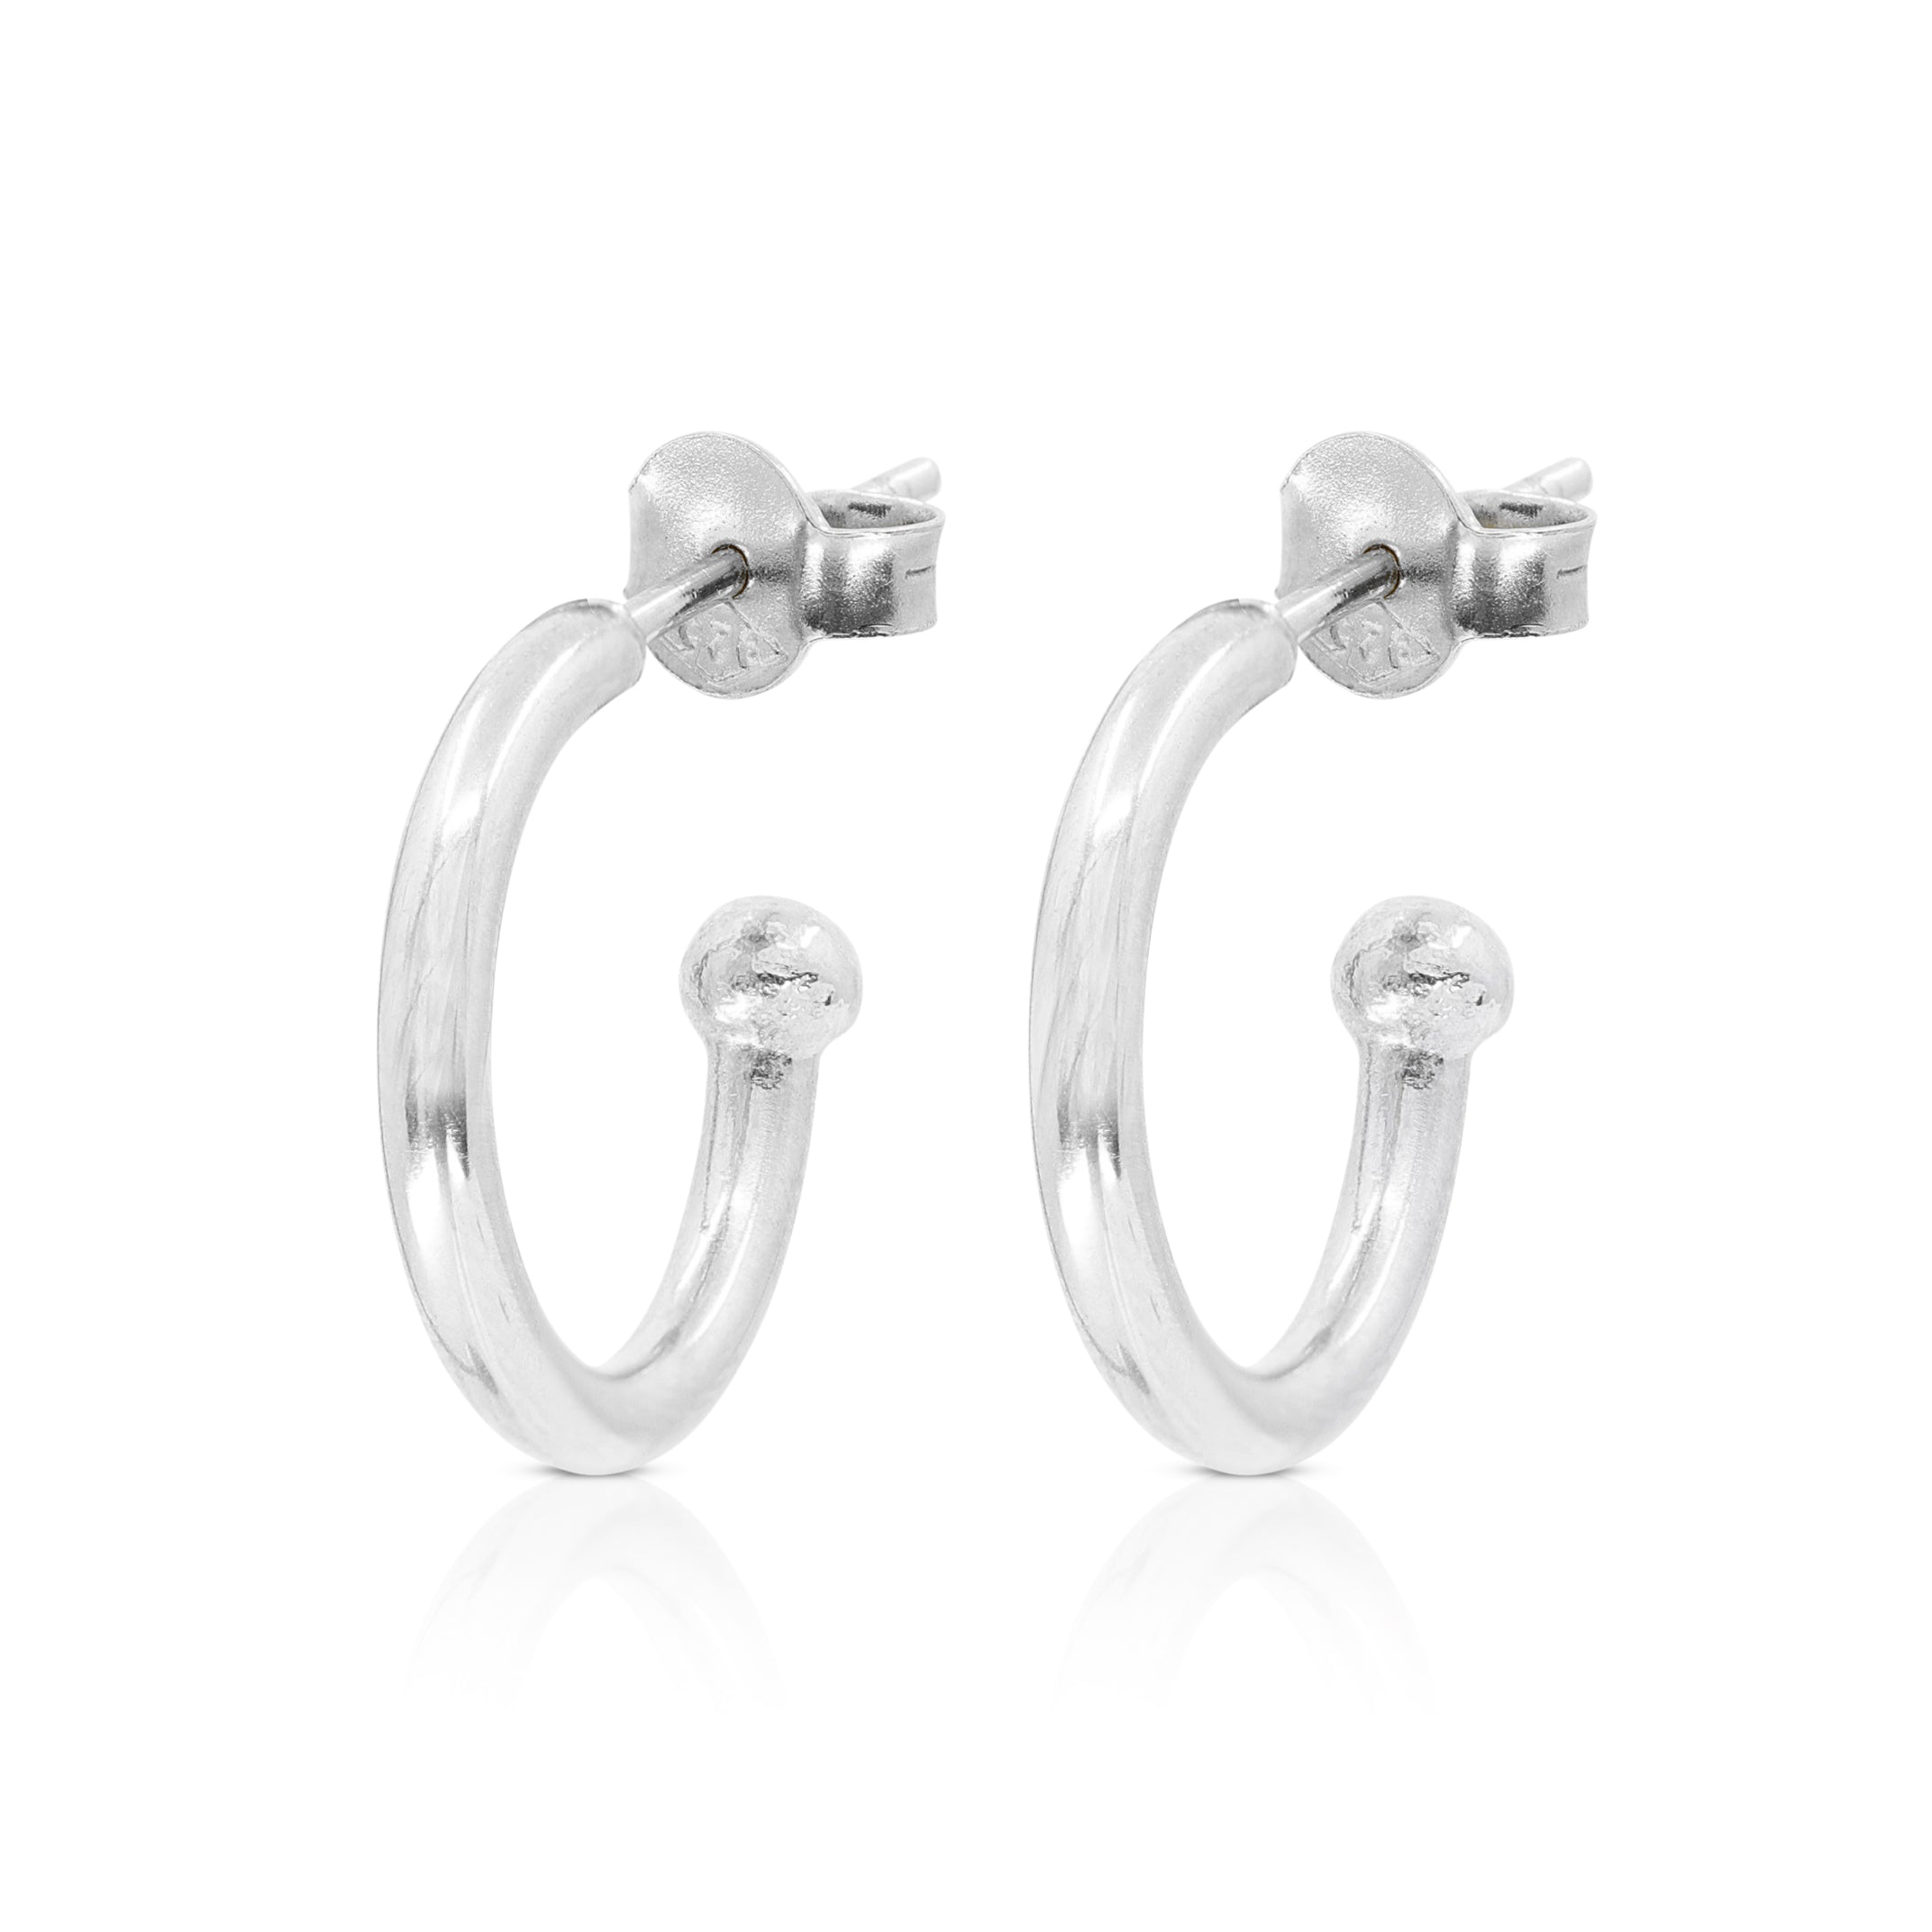 Polished Silver Hoops - Small